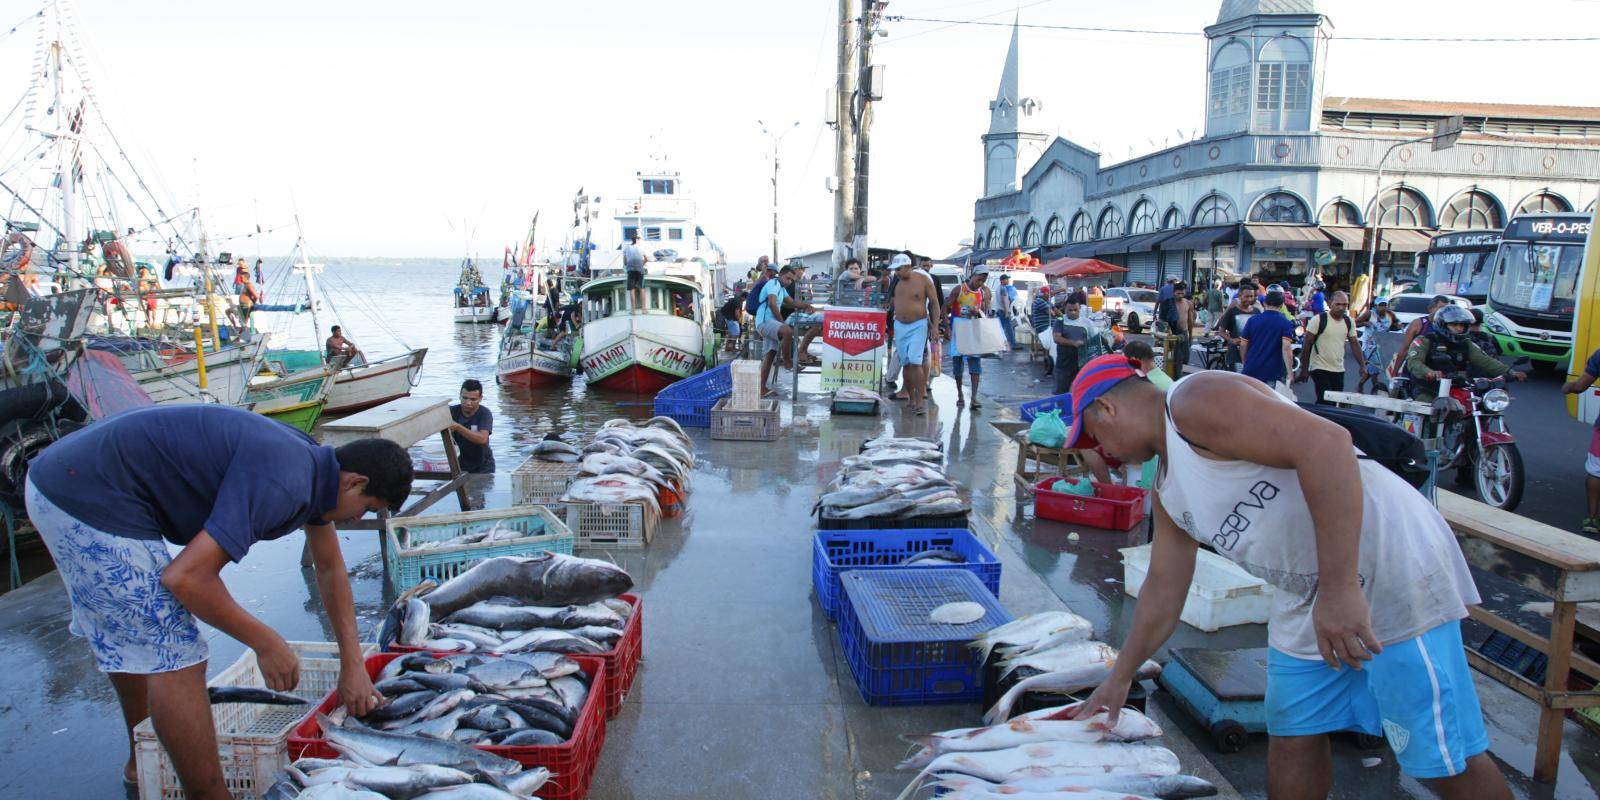 Workers arranging boxes of fish on the quayside outside a historic market building